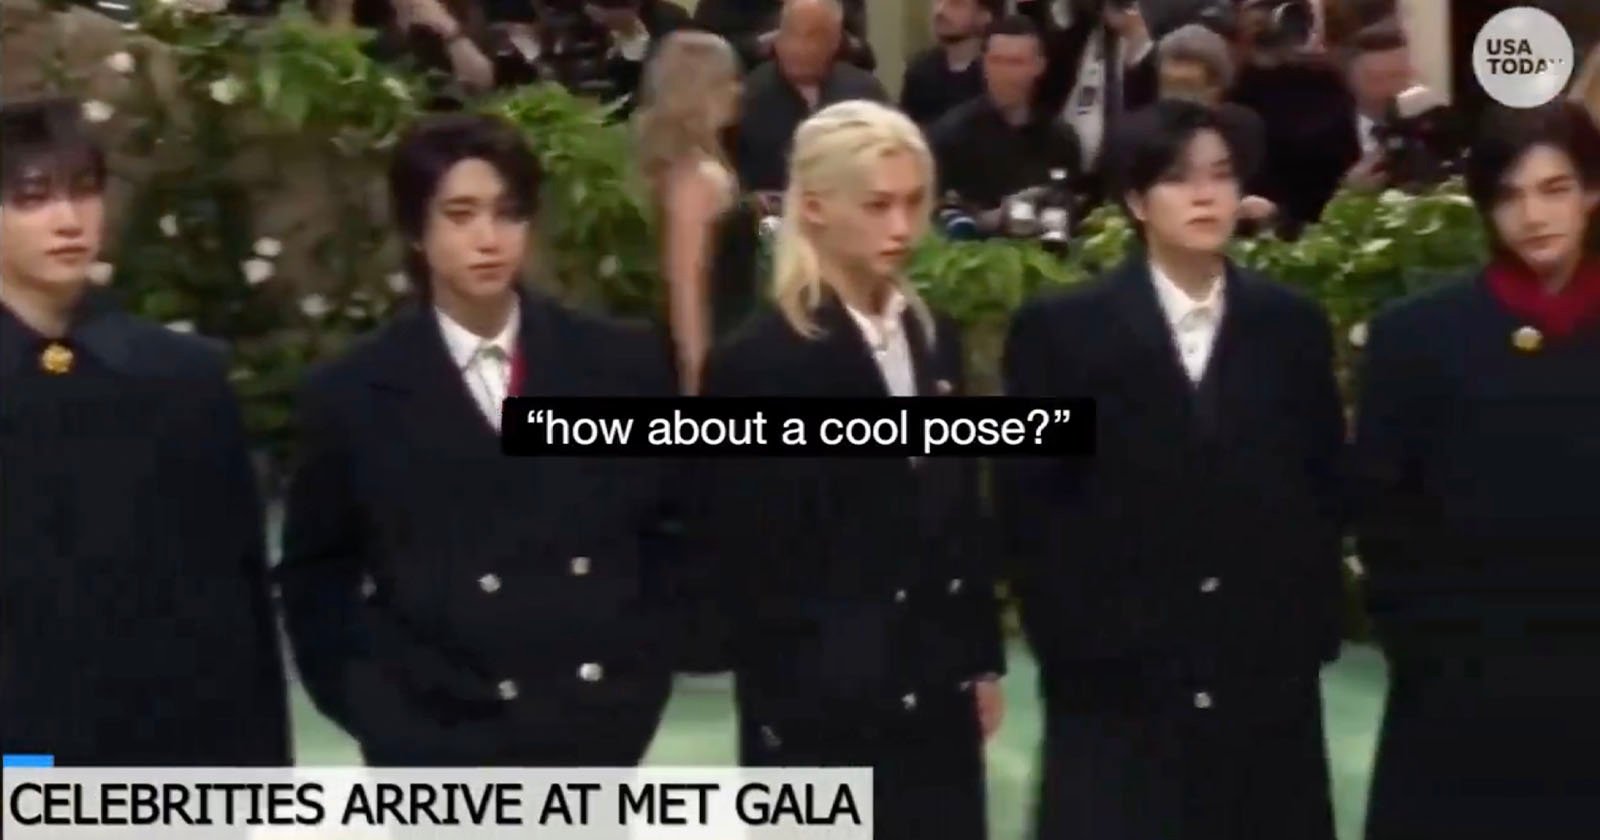 Five individuals standing side by side in formal attire at the met gala event, with a caption how about a cool pose? overlaying the image.